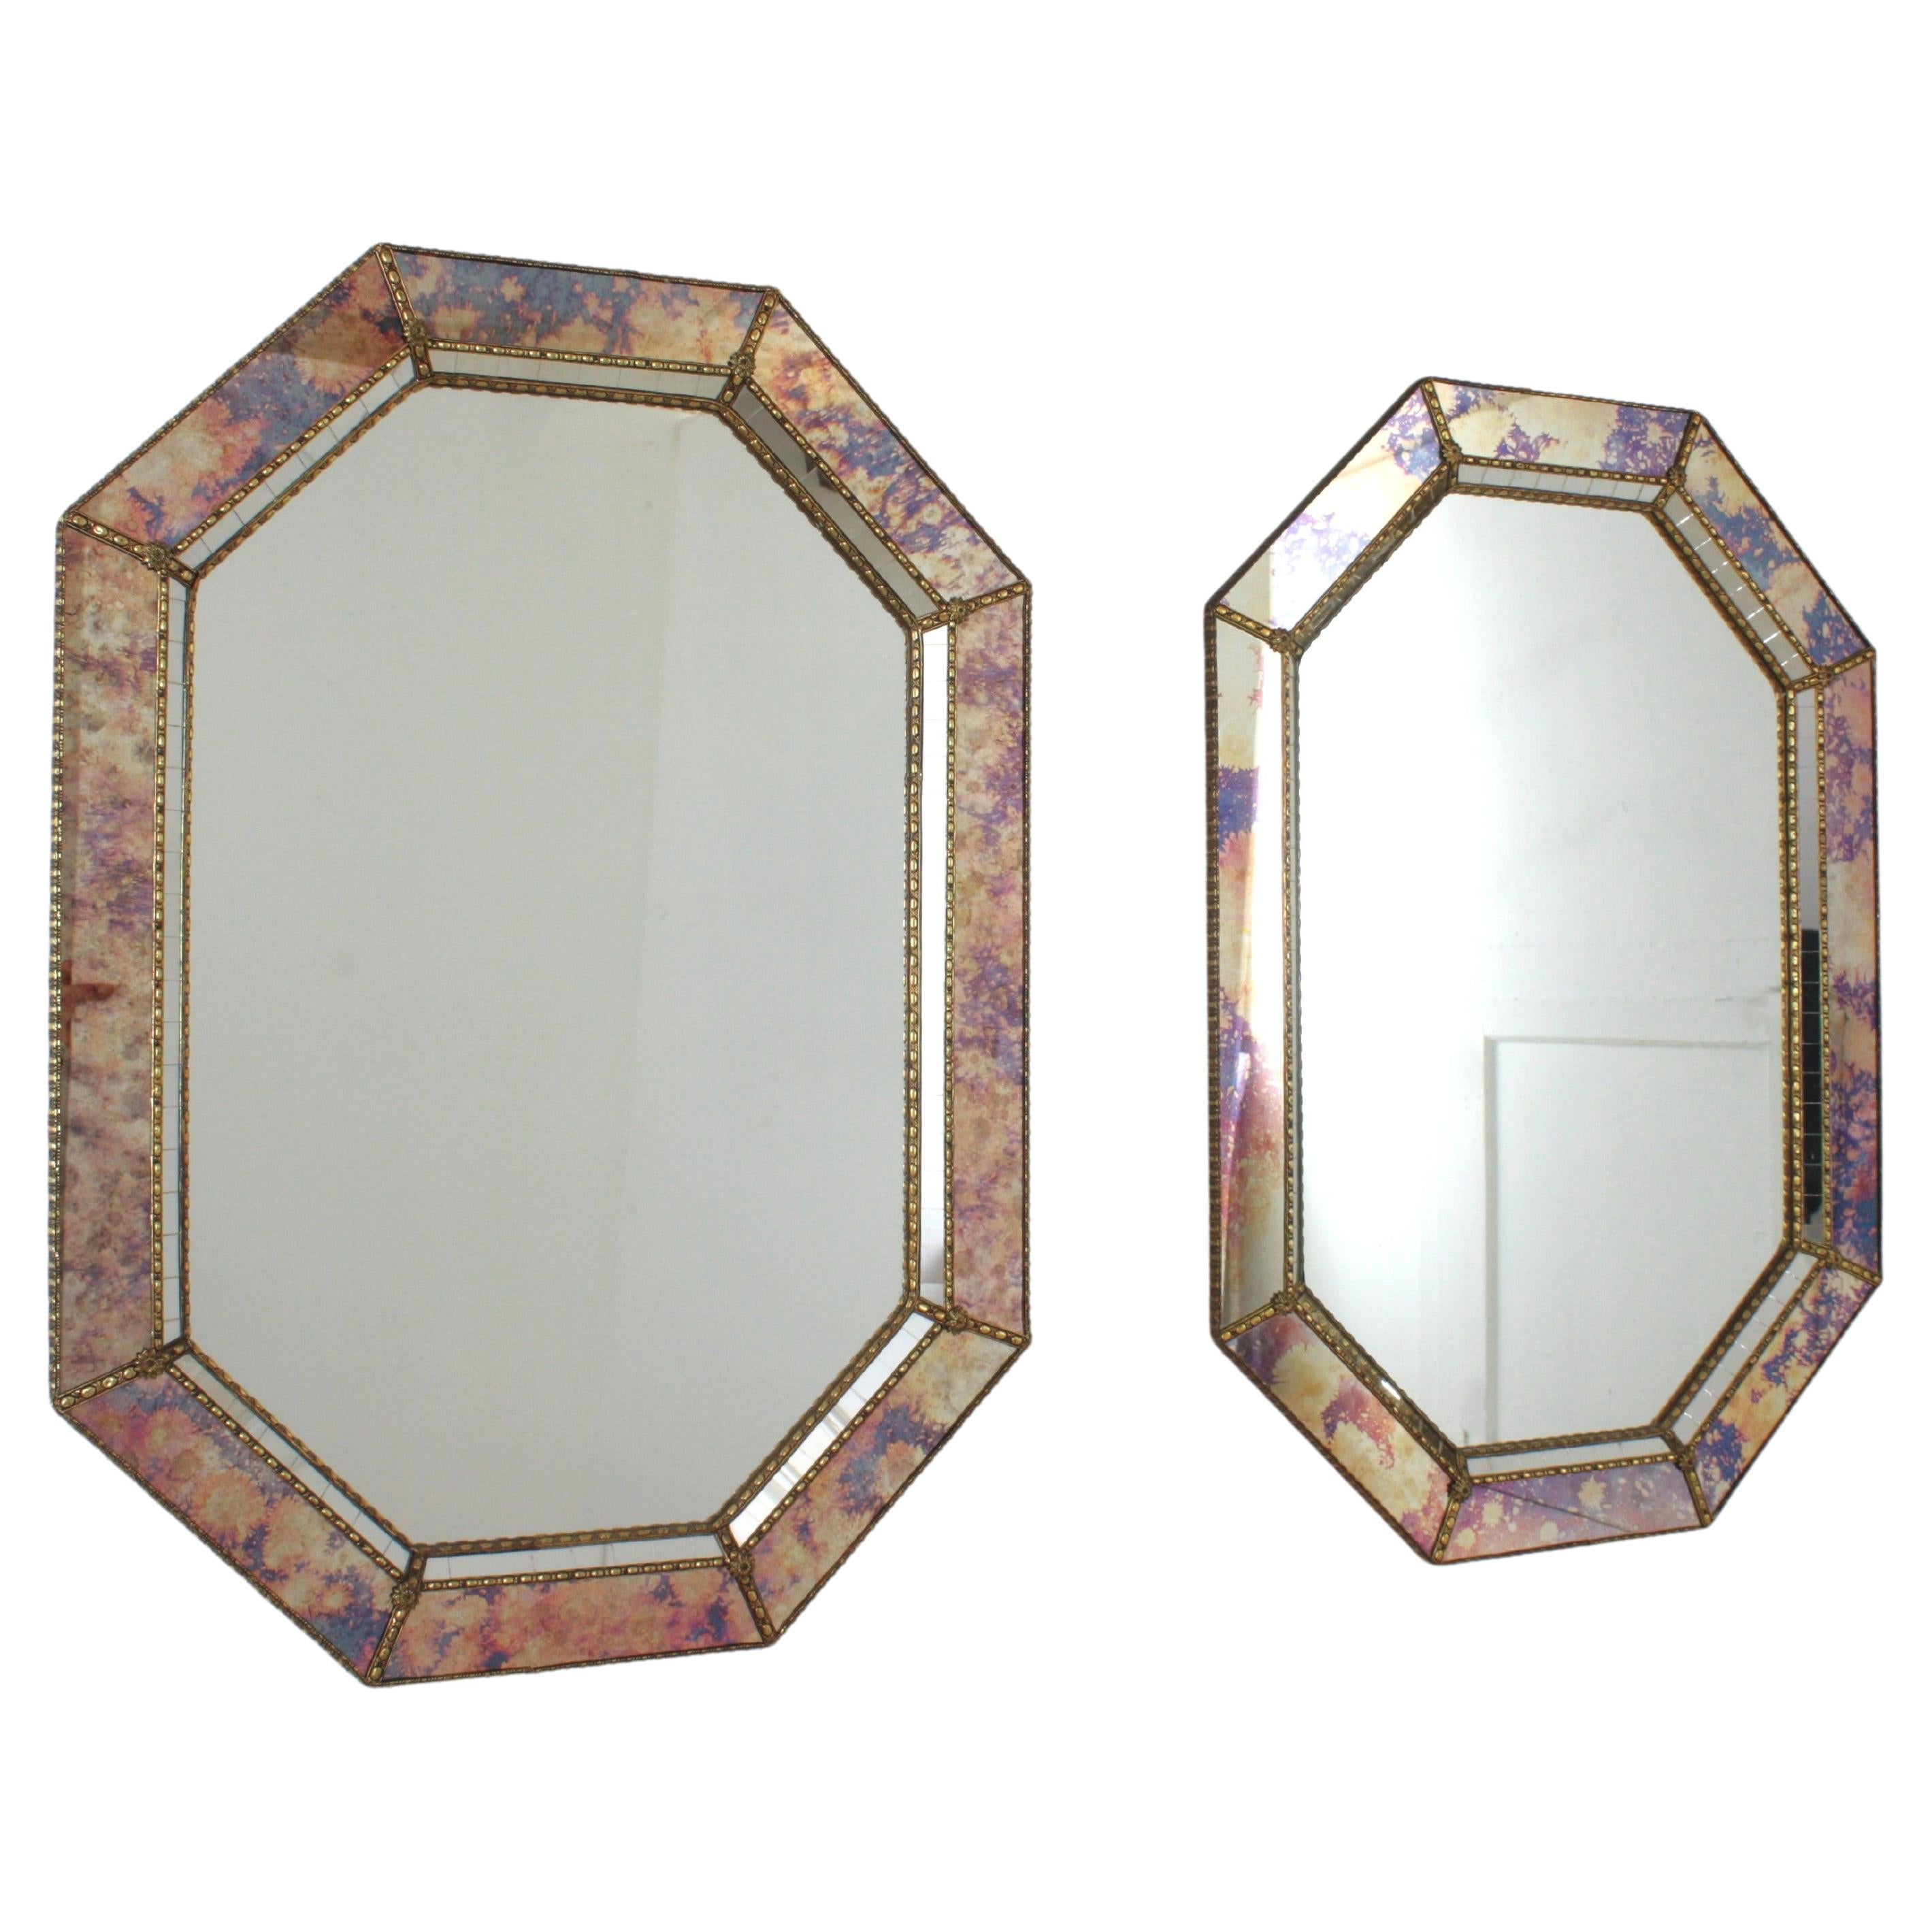 Cool Venetian style Hollywood Regency octagonal mirrors with iridiscent and mirror glass panels. Spain, 1960s
This glamorous pair of wall mirrors feature double layered mirror frames made of brass. Octagonal form with frames with two layers of